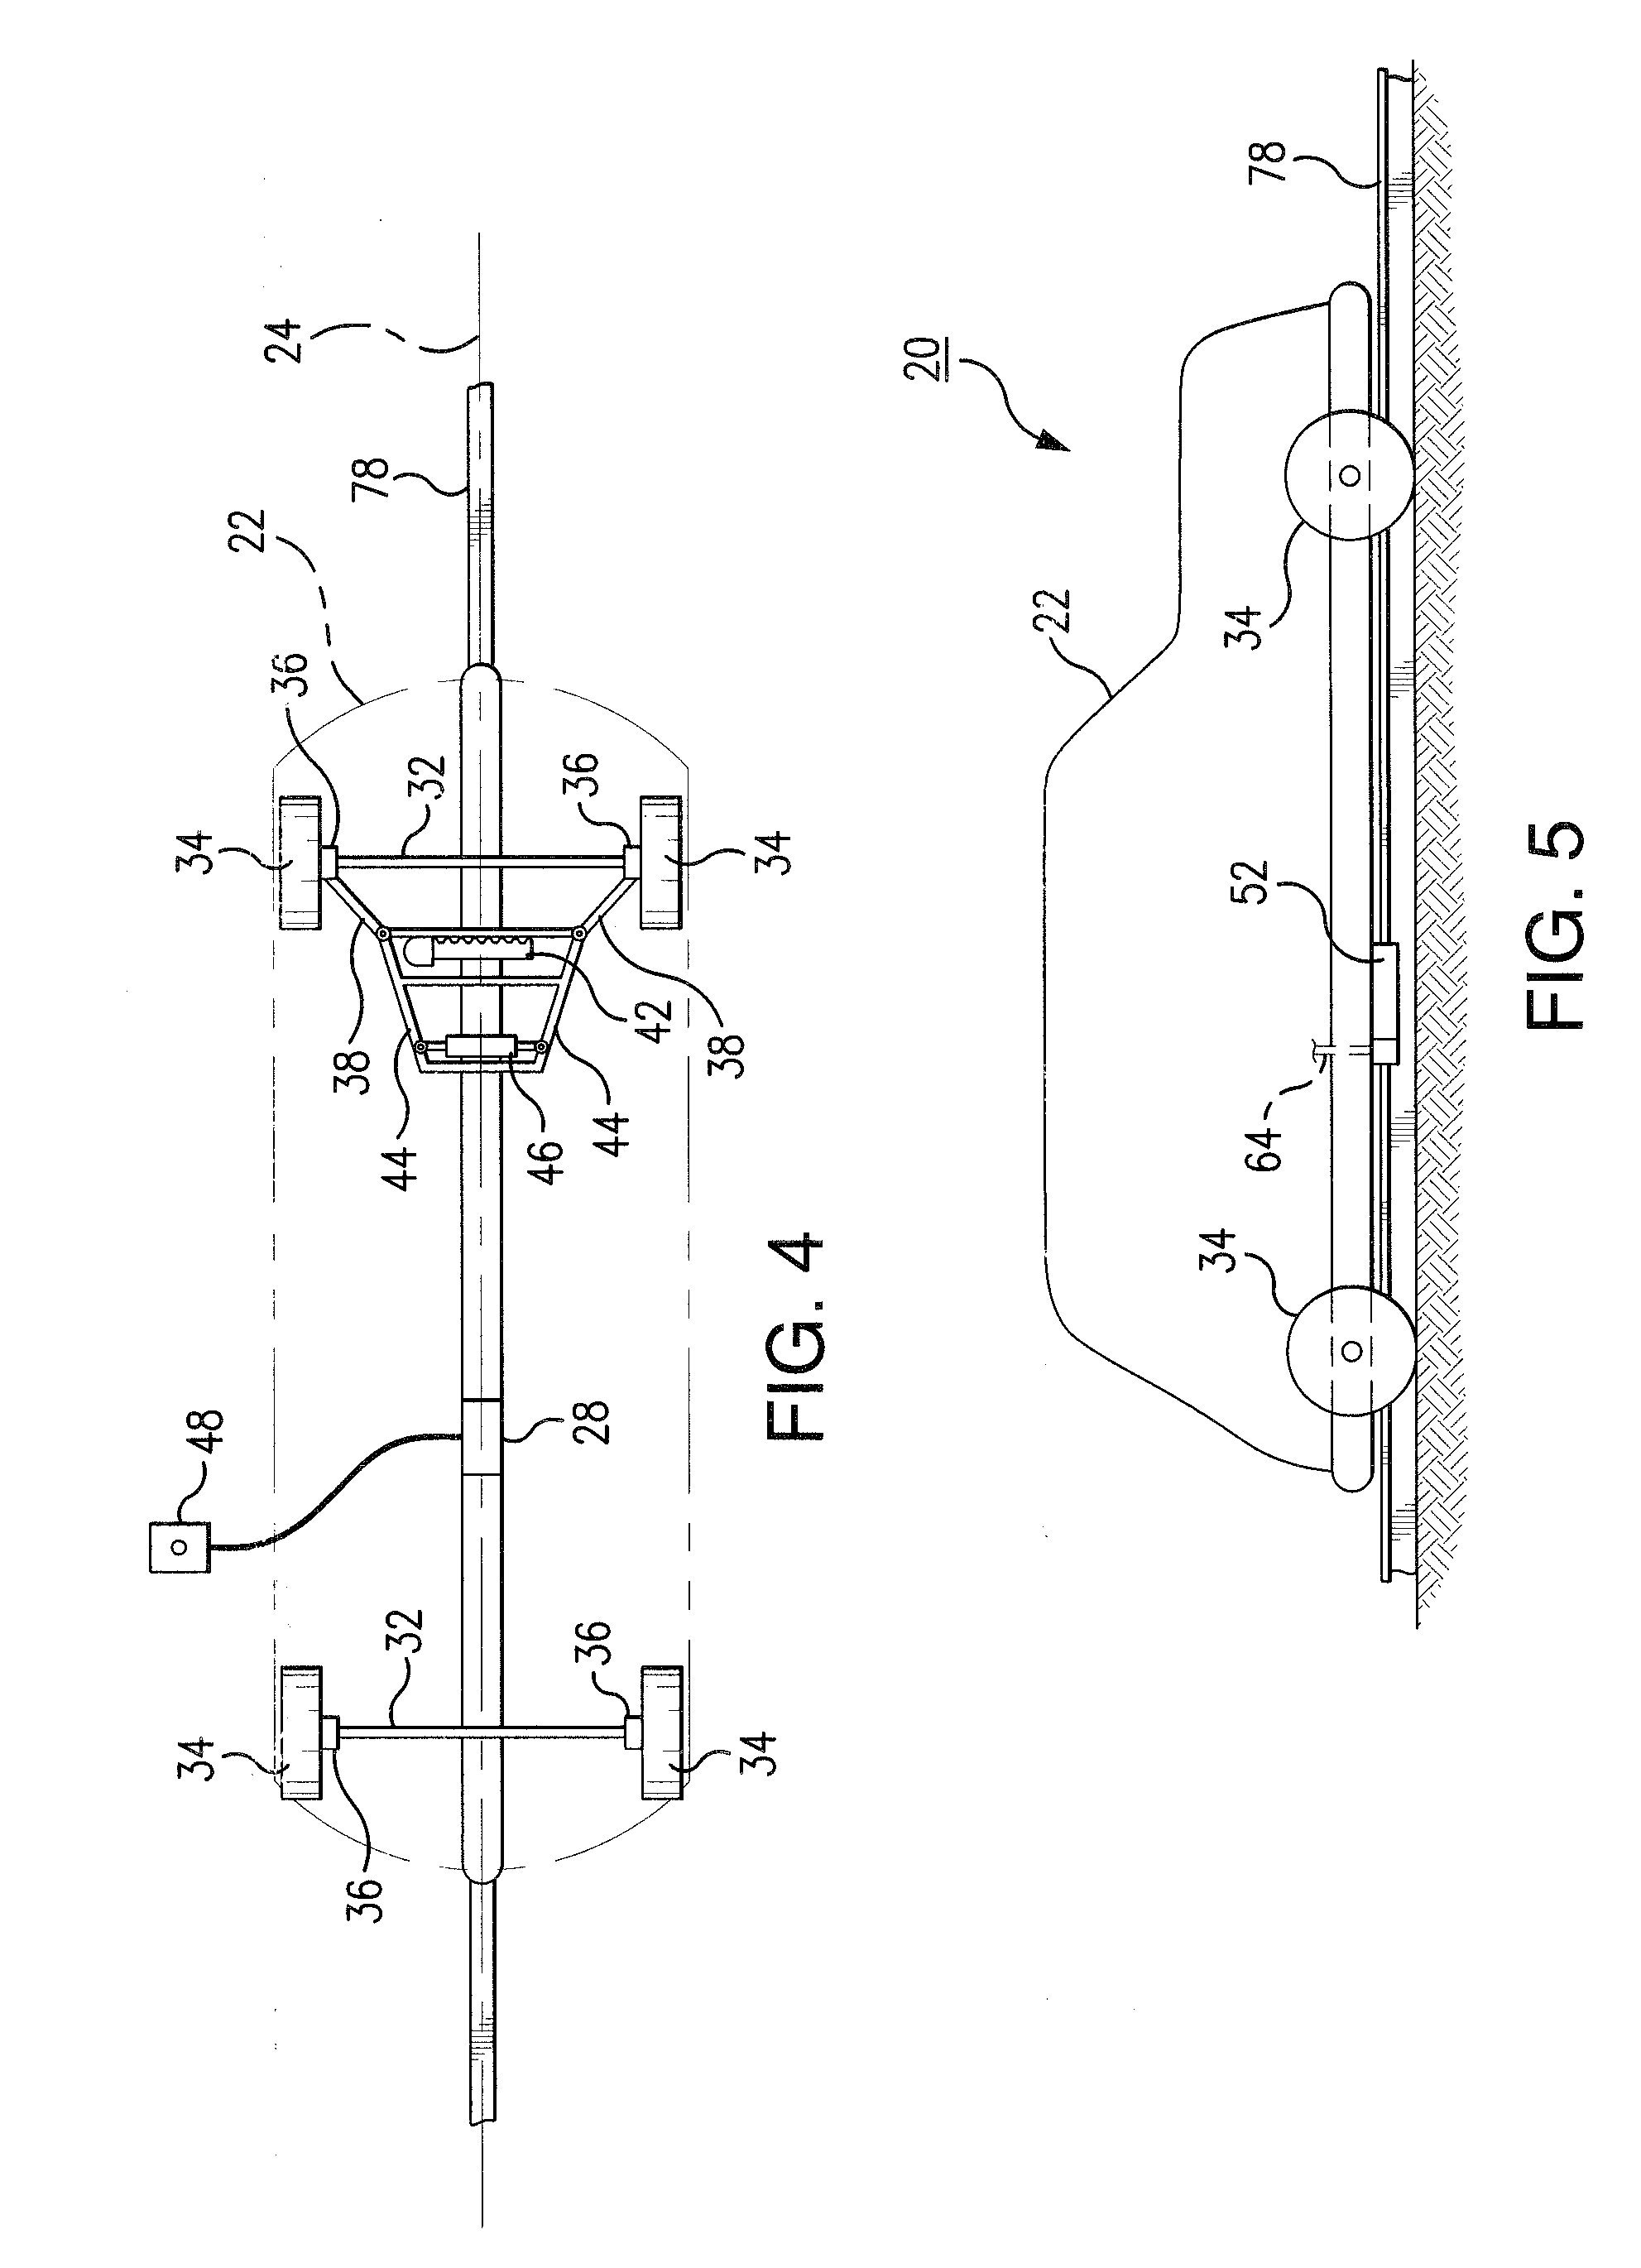 System for automated vehicle operation and control